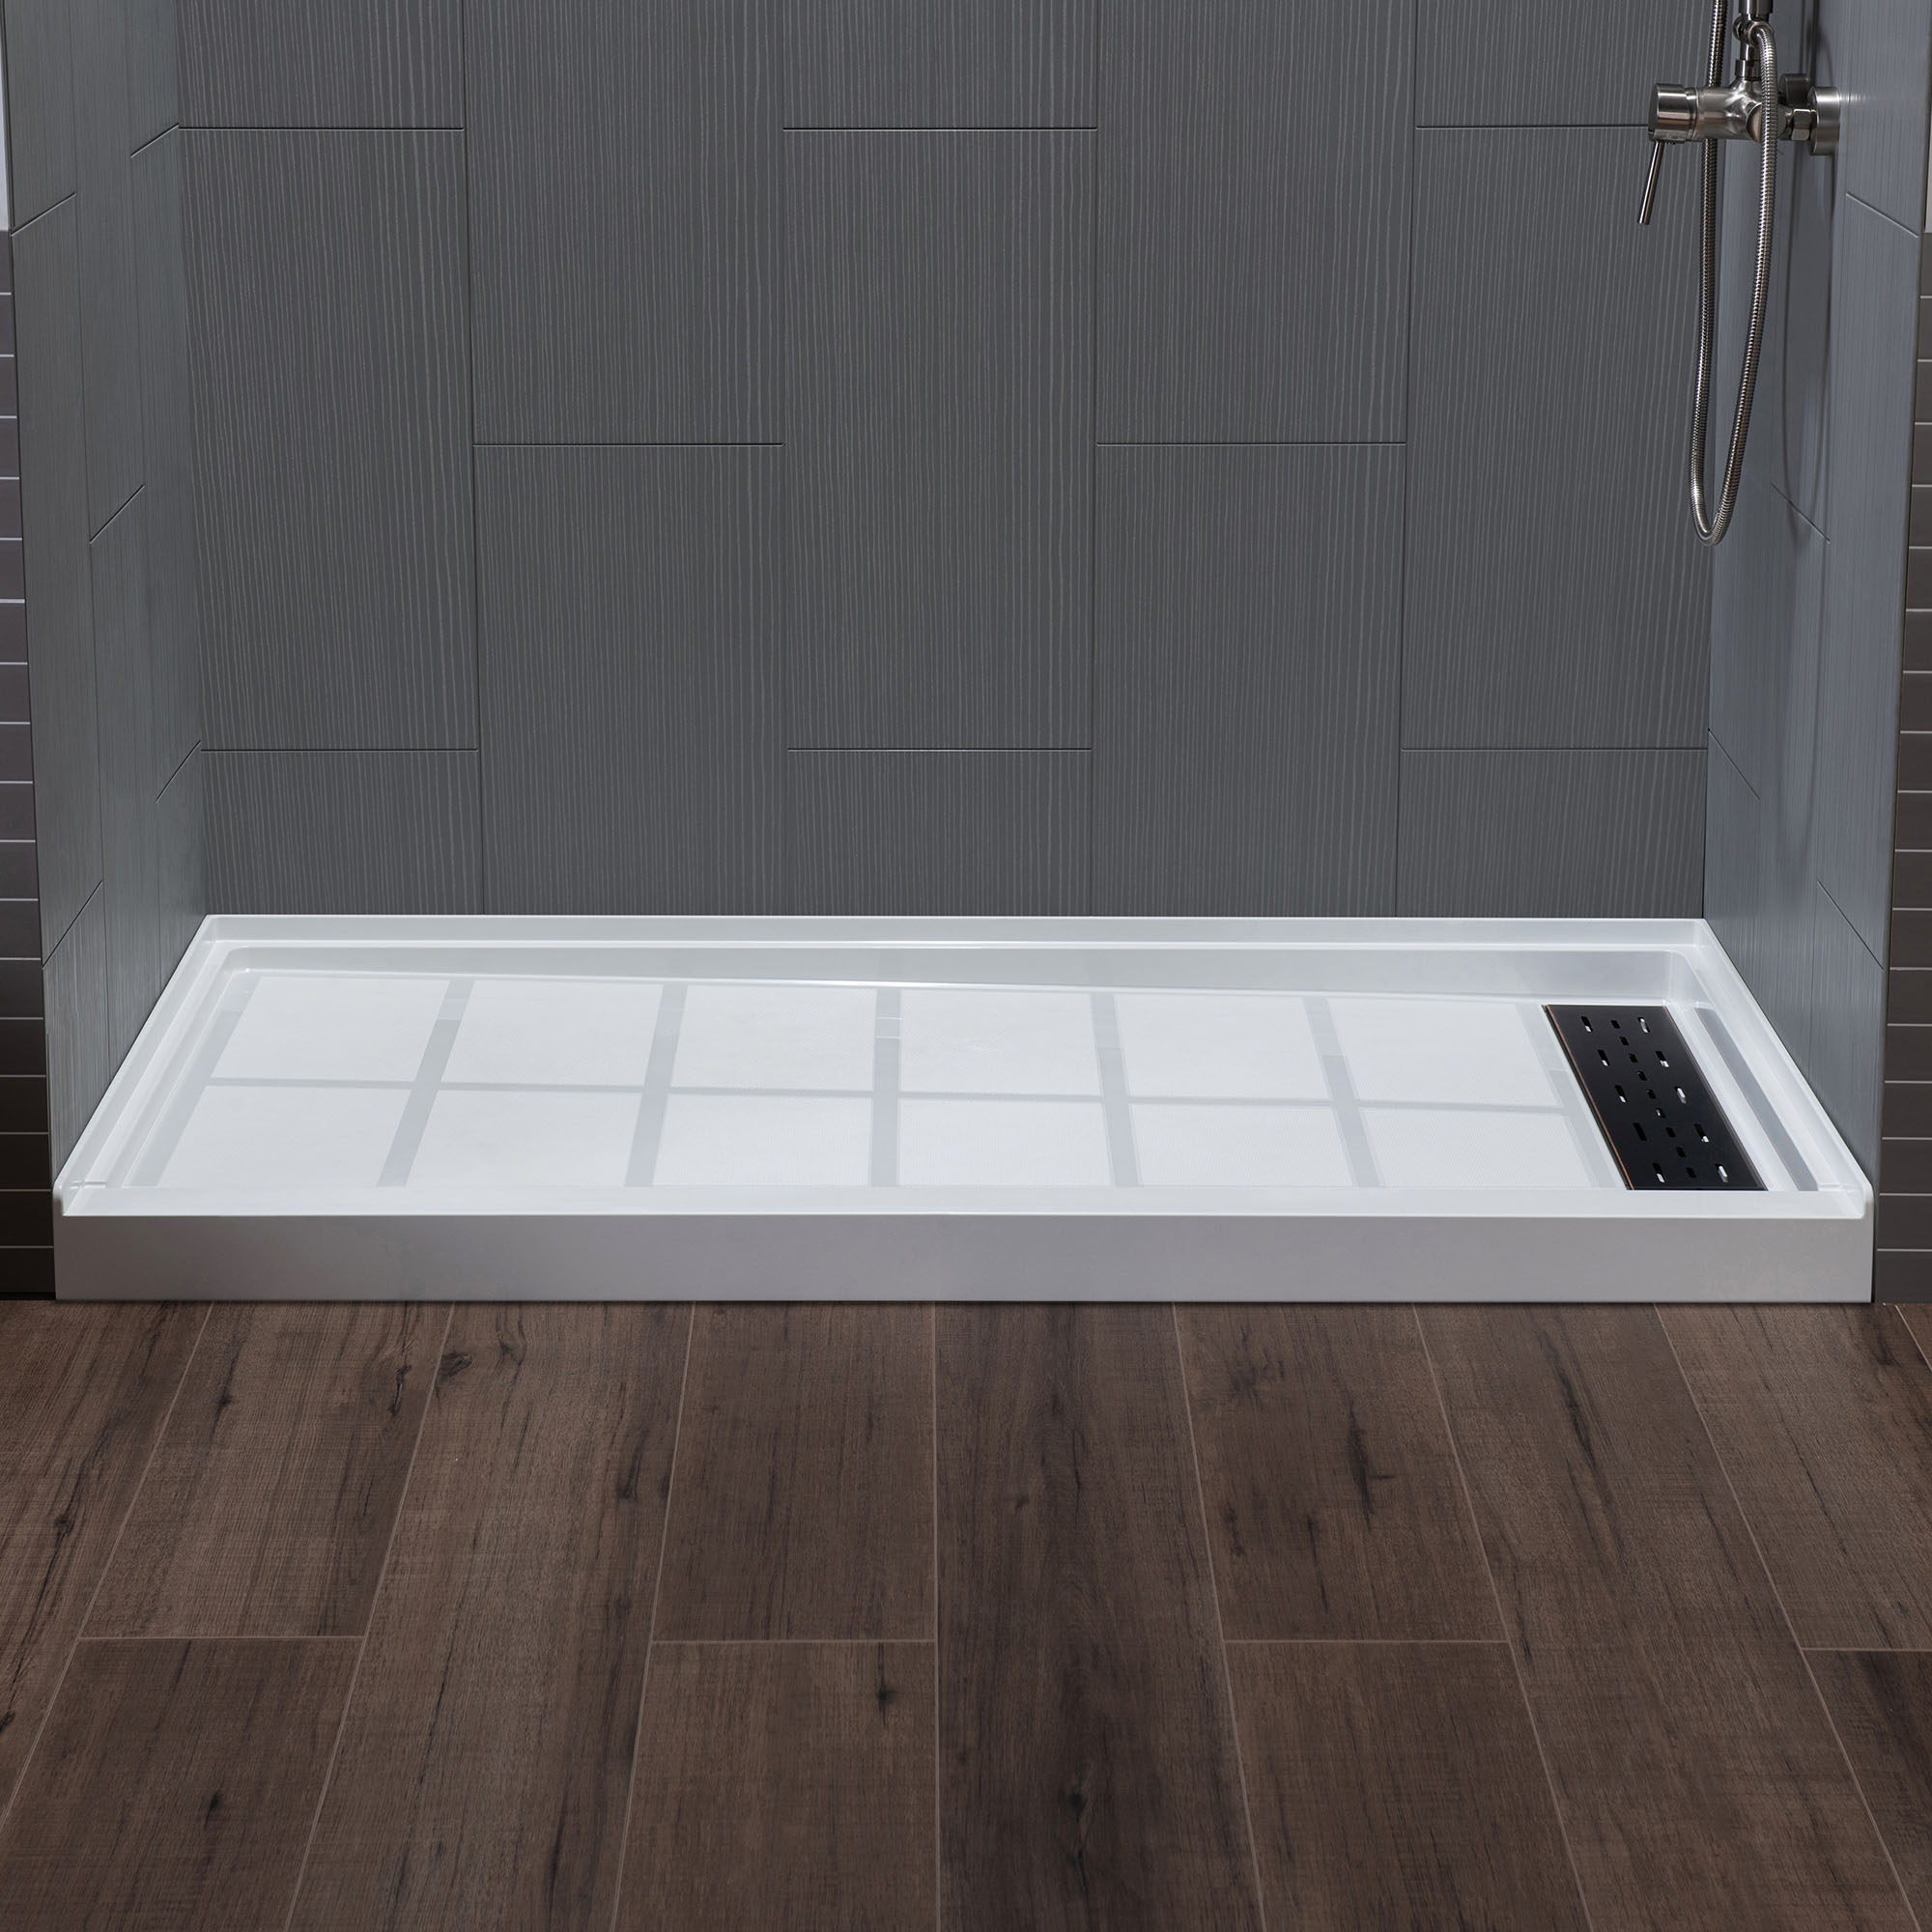  WOODBRIDGE Solid Surface 3-Panel Shower Wall Kit, 36-in L x 60-in W x 75-in H, Stacked Block in a Staggered Vertical Pattern. Matte Grey Finish_11775